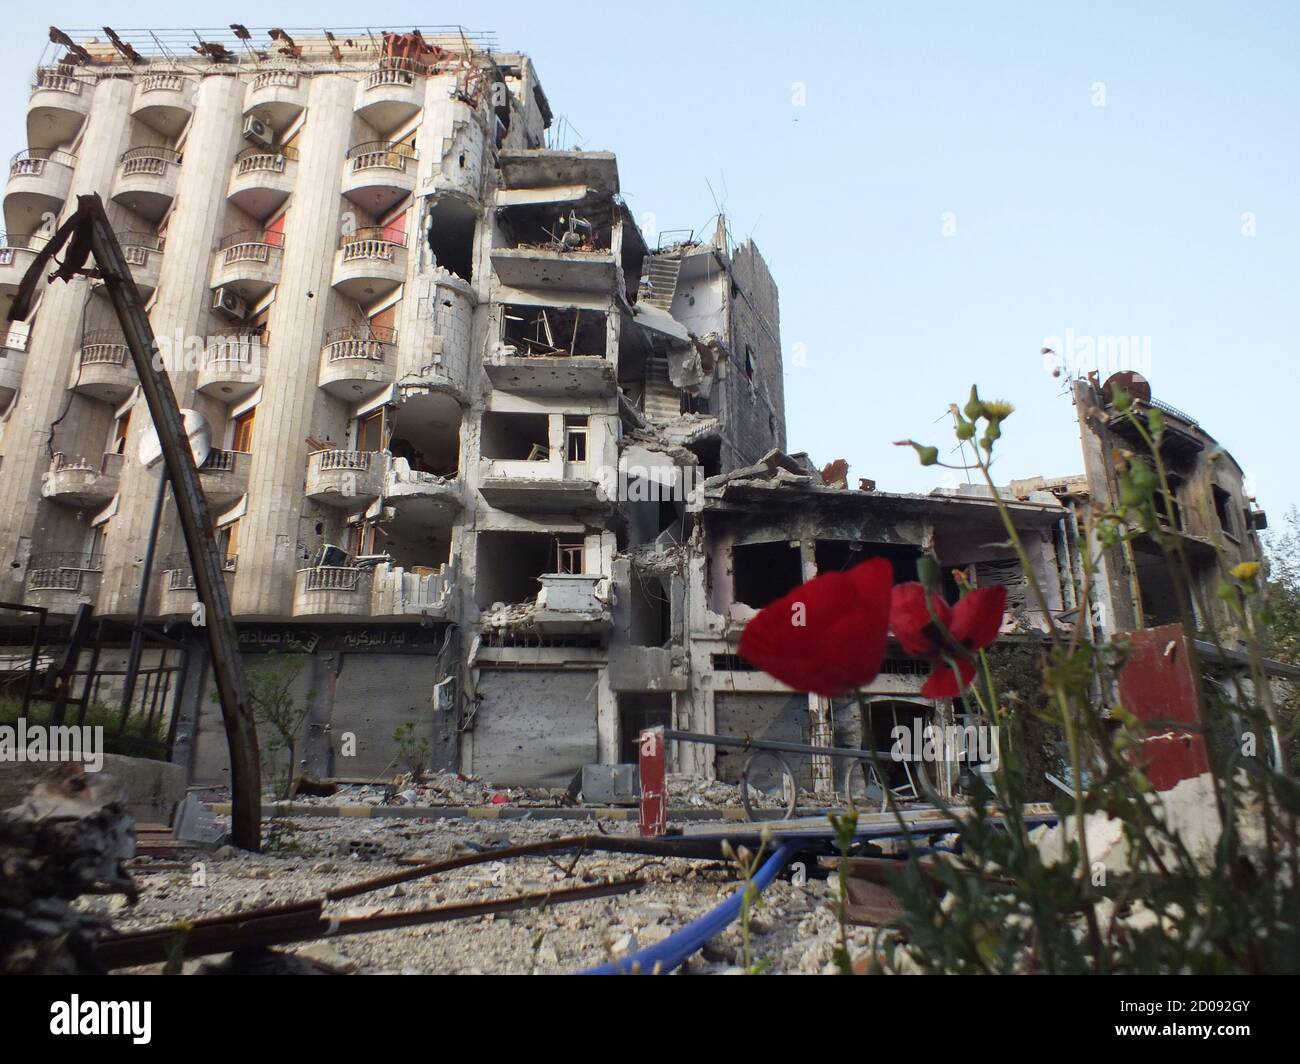 Coquelicots are seen on a street lined with buildings damaged by what activists said was shelling by forces loyal to Syria's President Bashar al-Assad in Jouret al Shayah area in Homs, April 8, 2013. REUTERS/Yazan Homsy (SYRIA - Tags: POLITICS CIVIL UNREST) Stock Photo